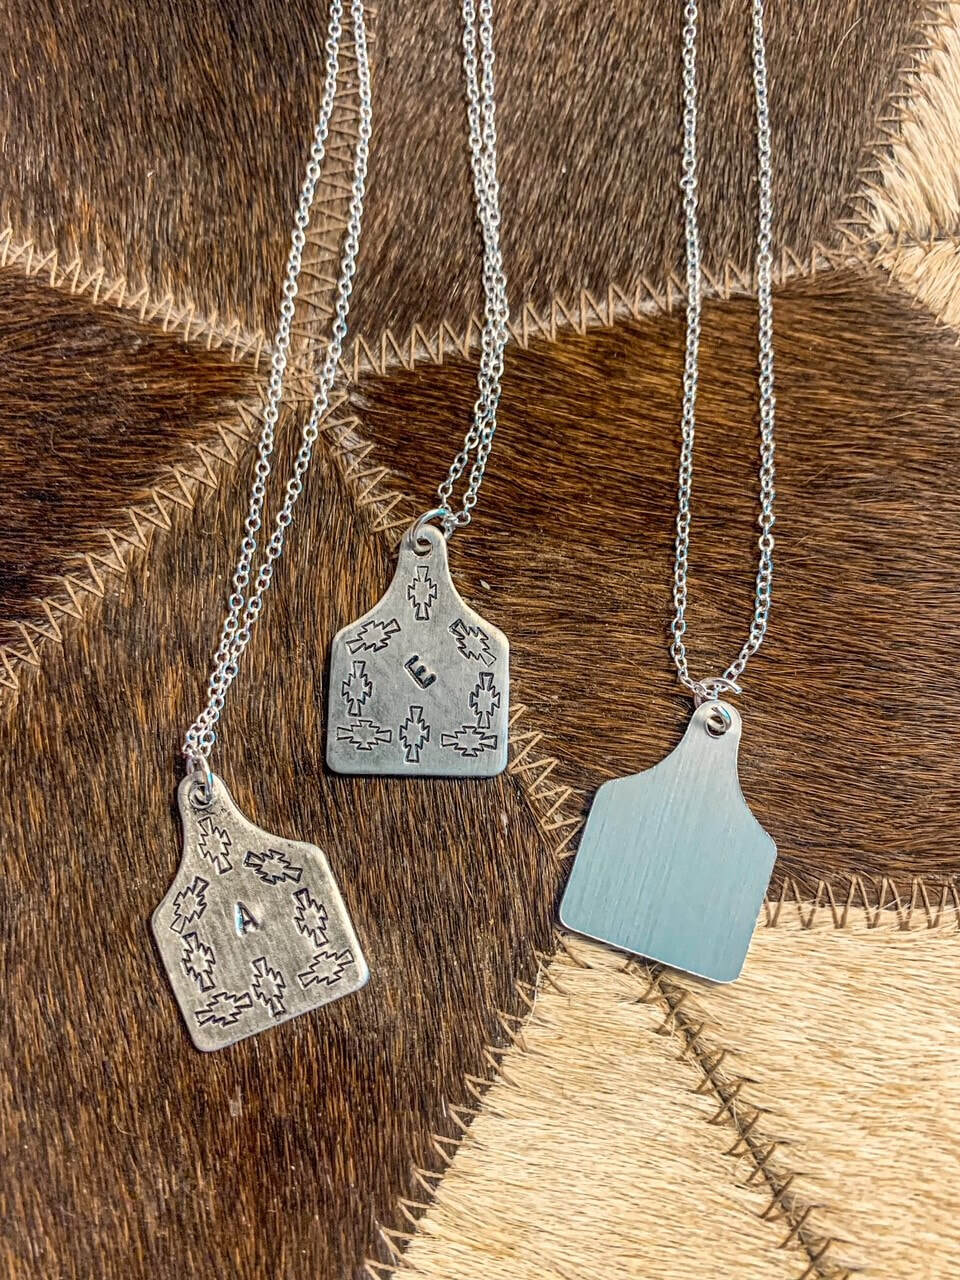 AAA - Necklace - Cattle Ear Tag - Pendant & Chain - Sterling Silver, R –  Queen B Country PTY LTD